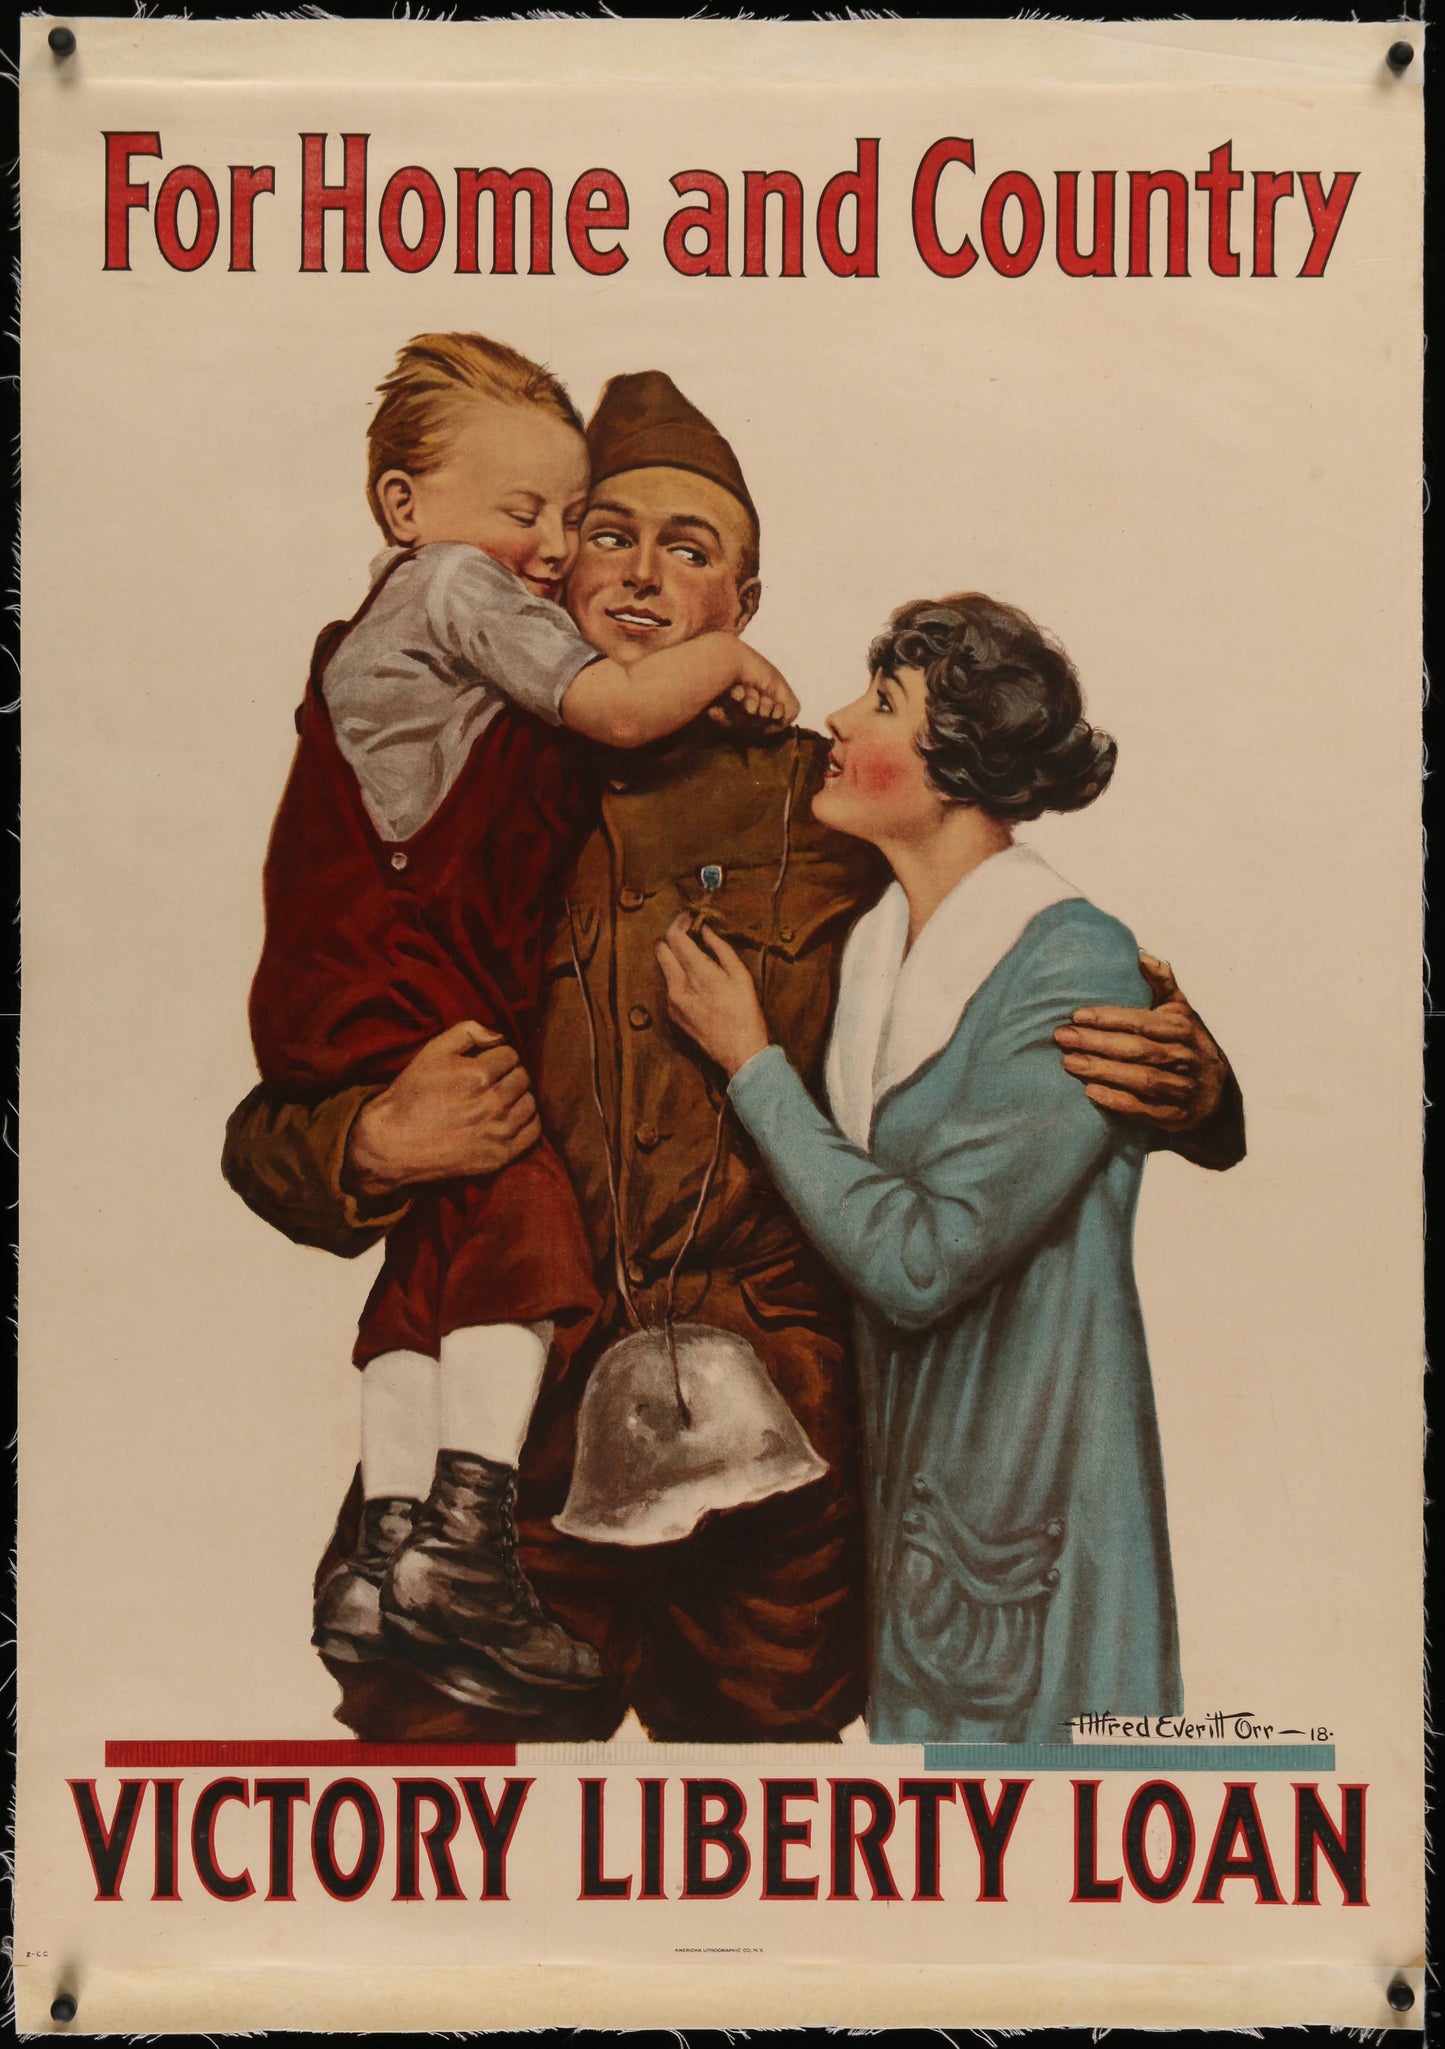 "For Home And Country" WWI Victory Liberty Loan Poster by Alfred Everitt Orr (1918) - posterpalace.com